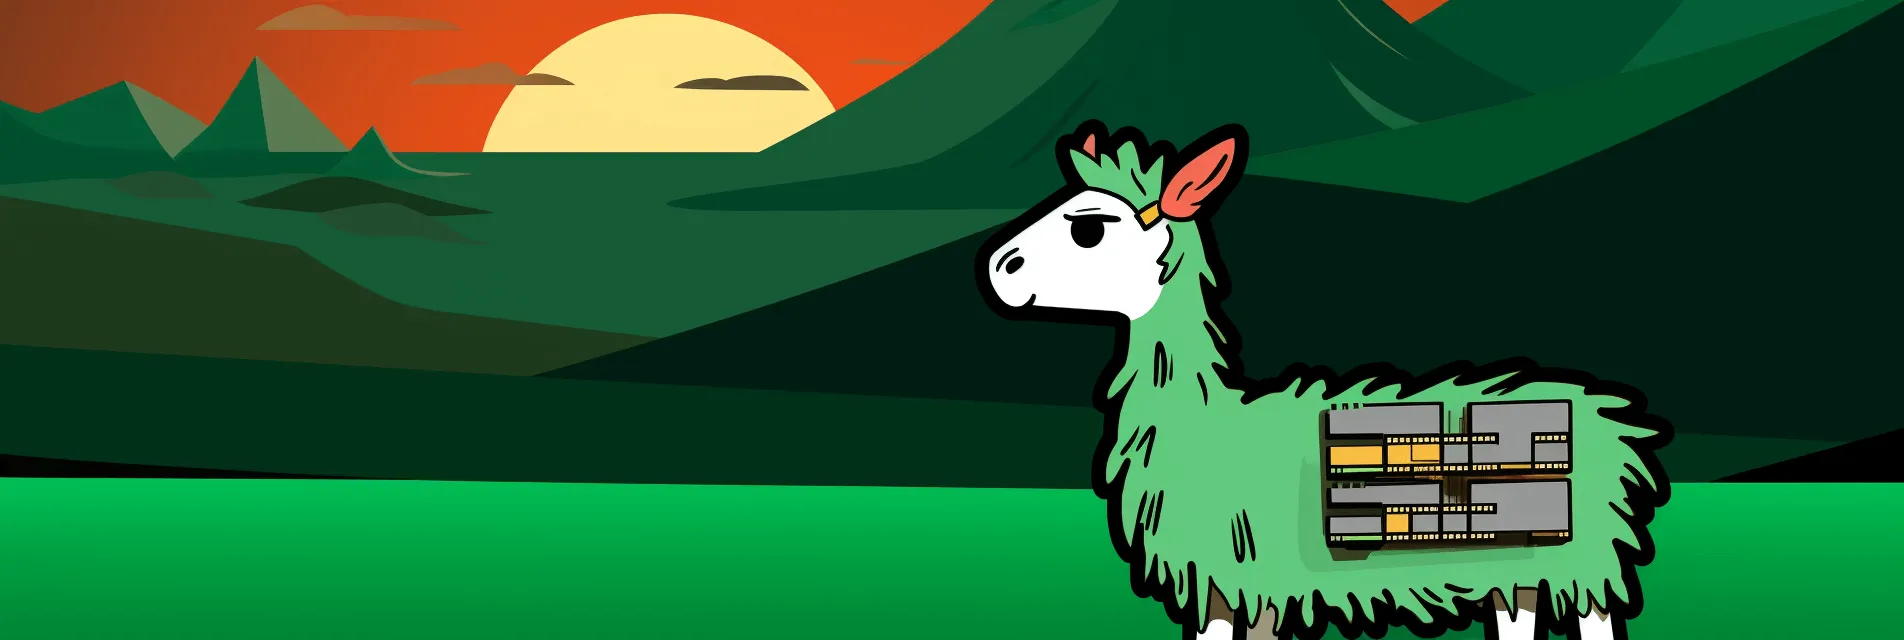 Discover the process of acquiring, compiling, and executing the llama.cpp code on a Linux environment in this detailed post.